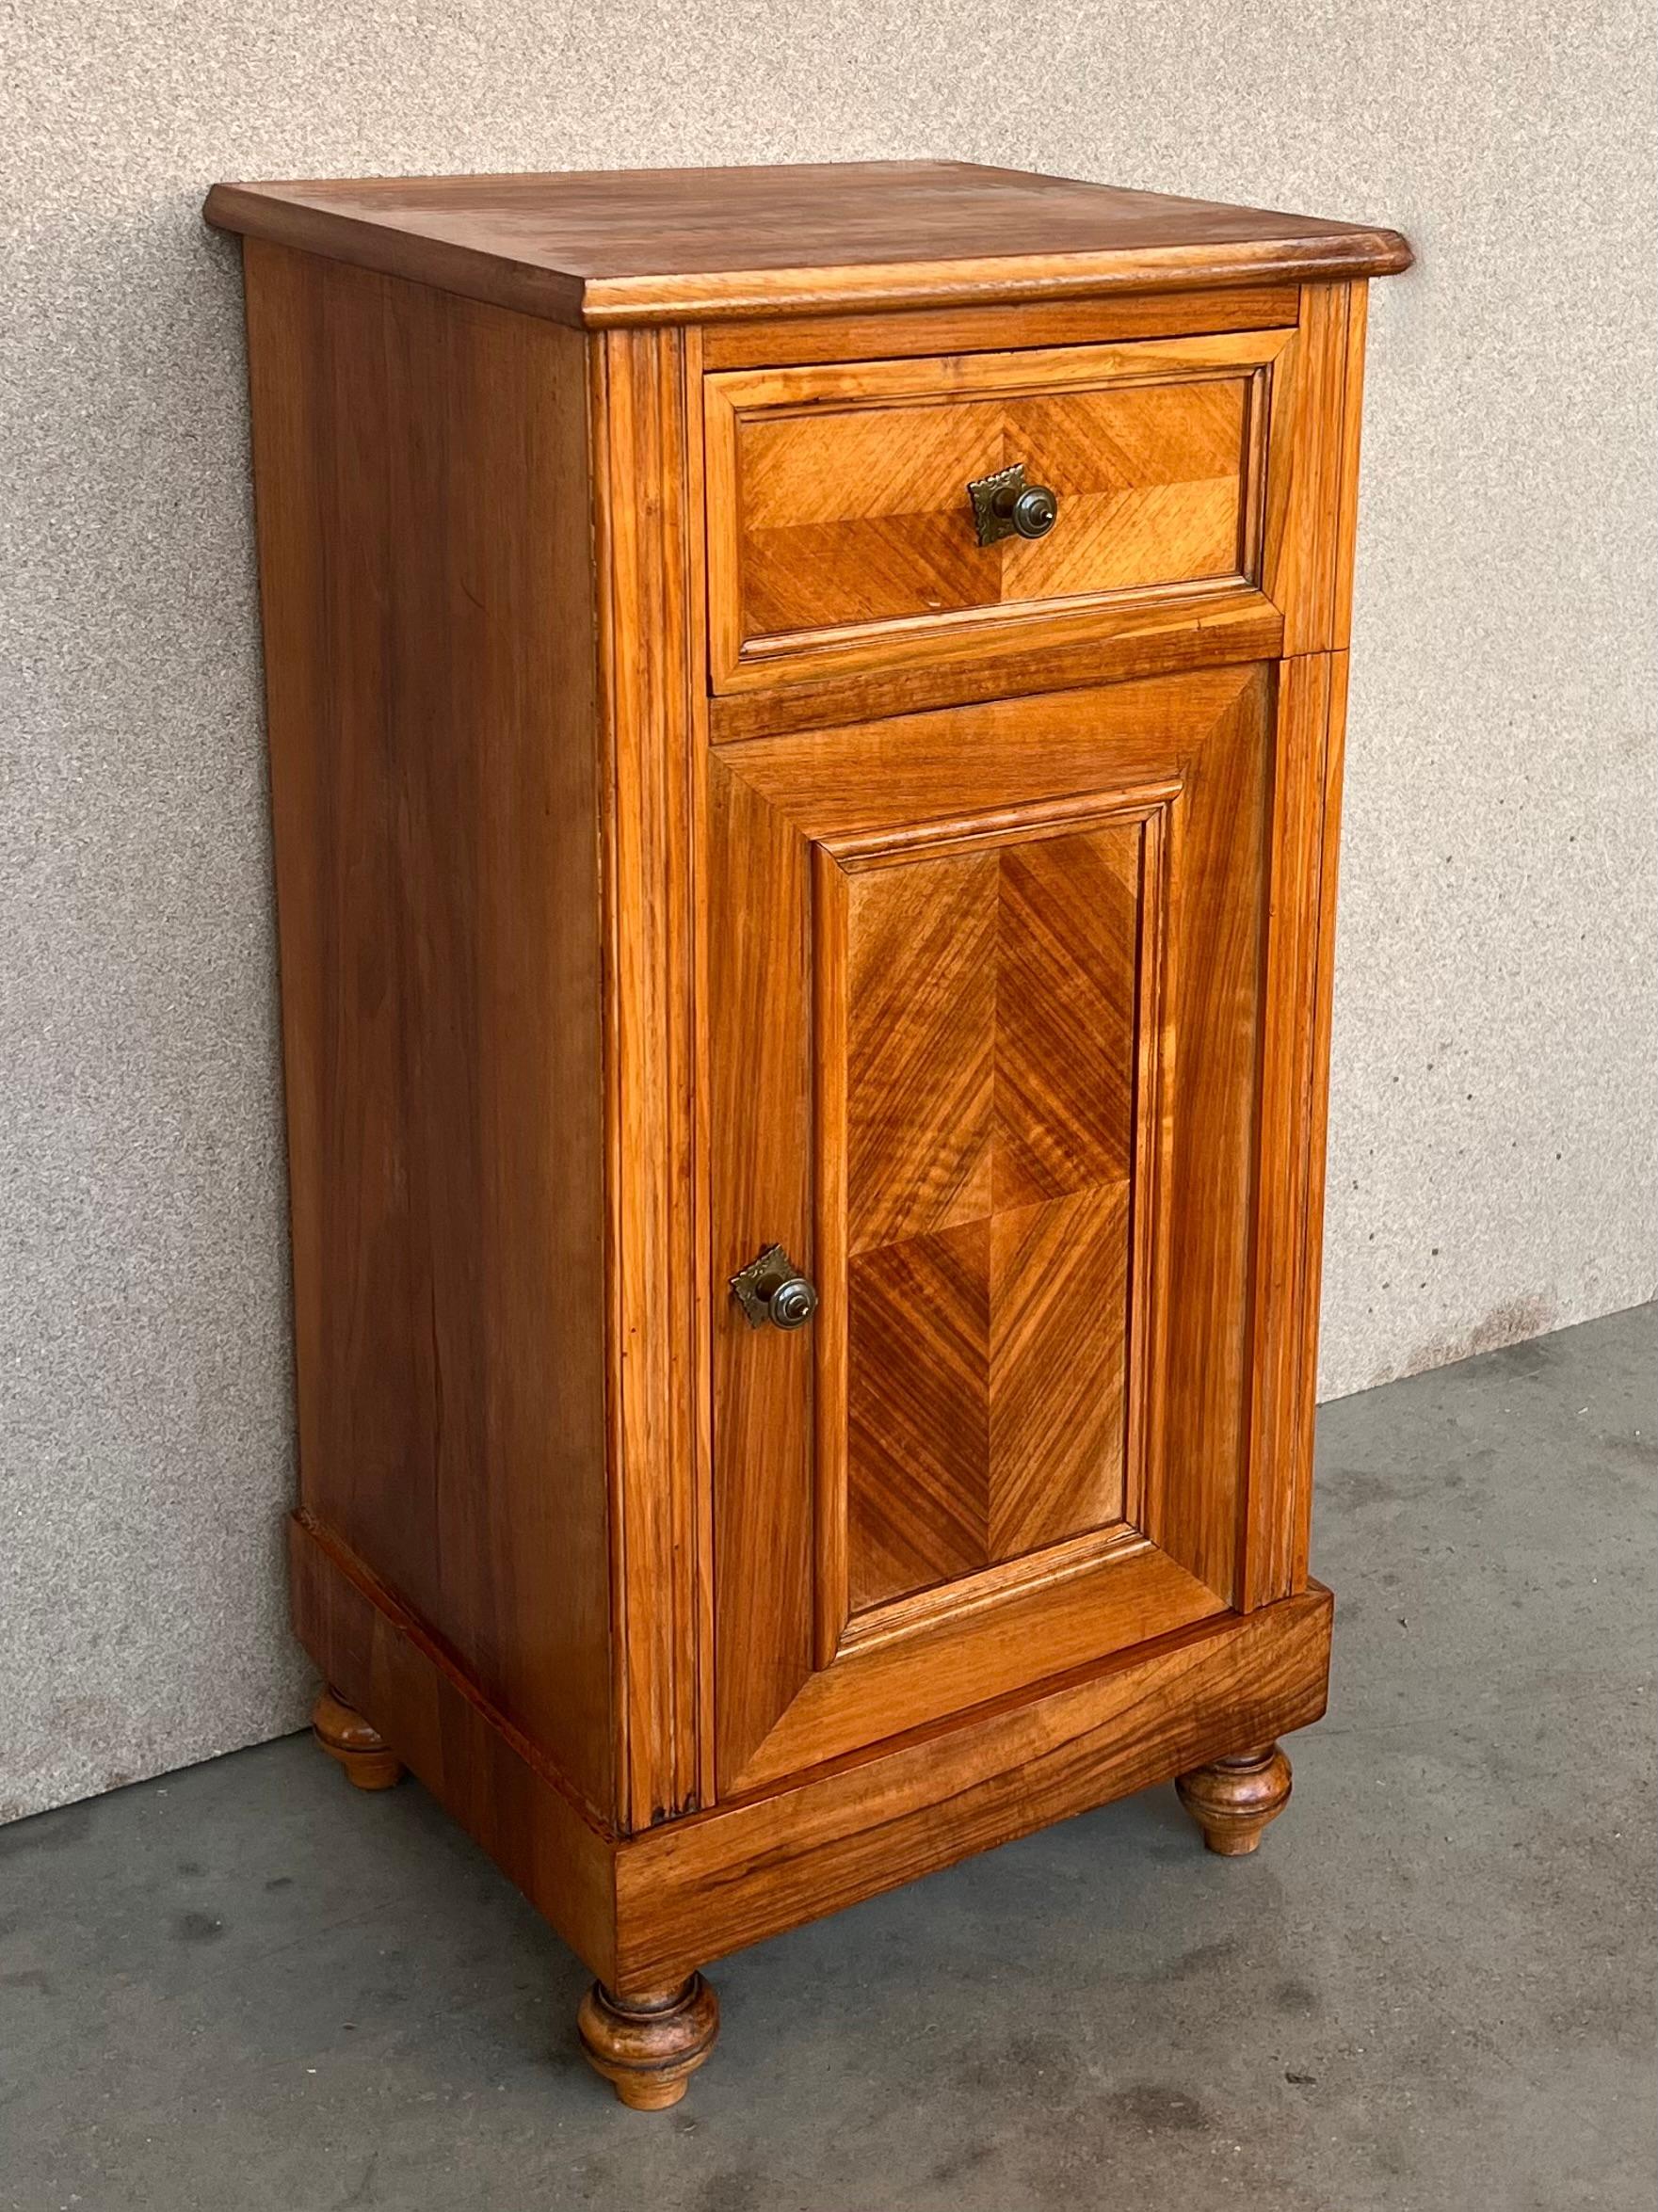 Pair of antique Biedermeier style bedside cabinets, late 19th-early 20th century, possibly French or Spanish, each in oblong rectangular form, wood top over a conforming case fitted with a single drawer over a cabinet door, raised on block base with